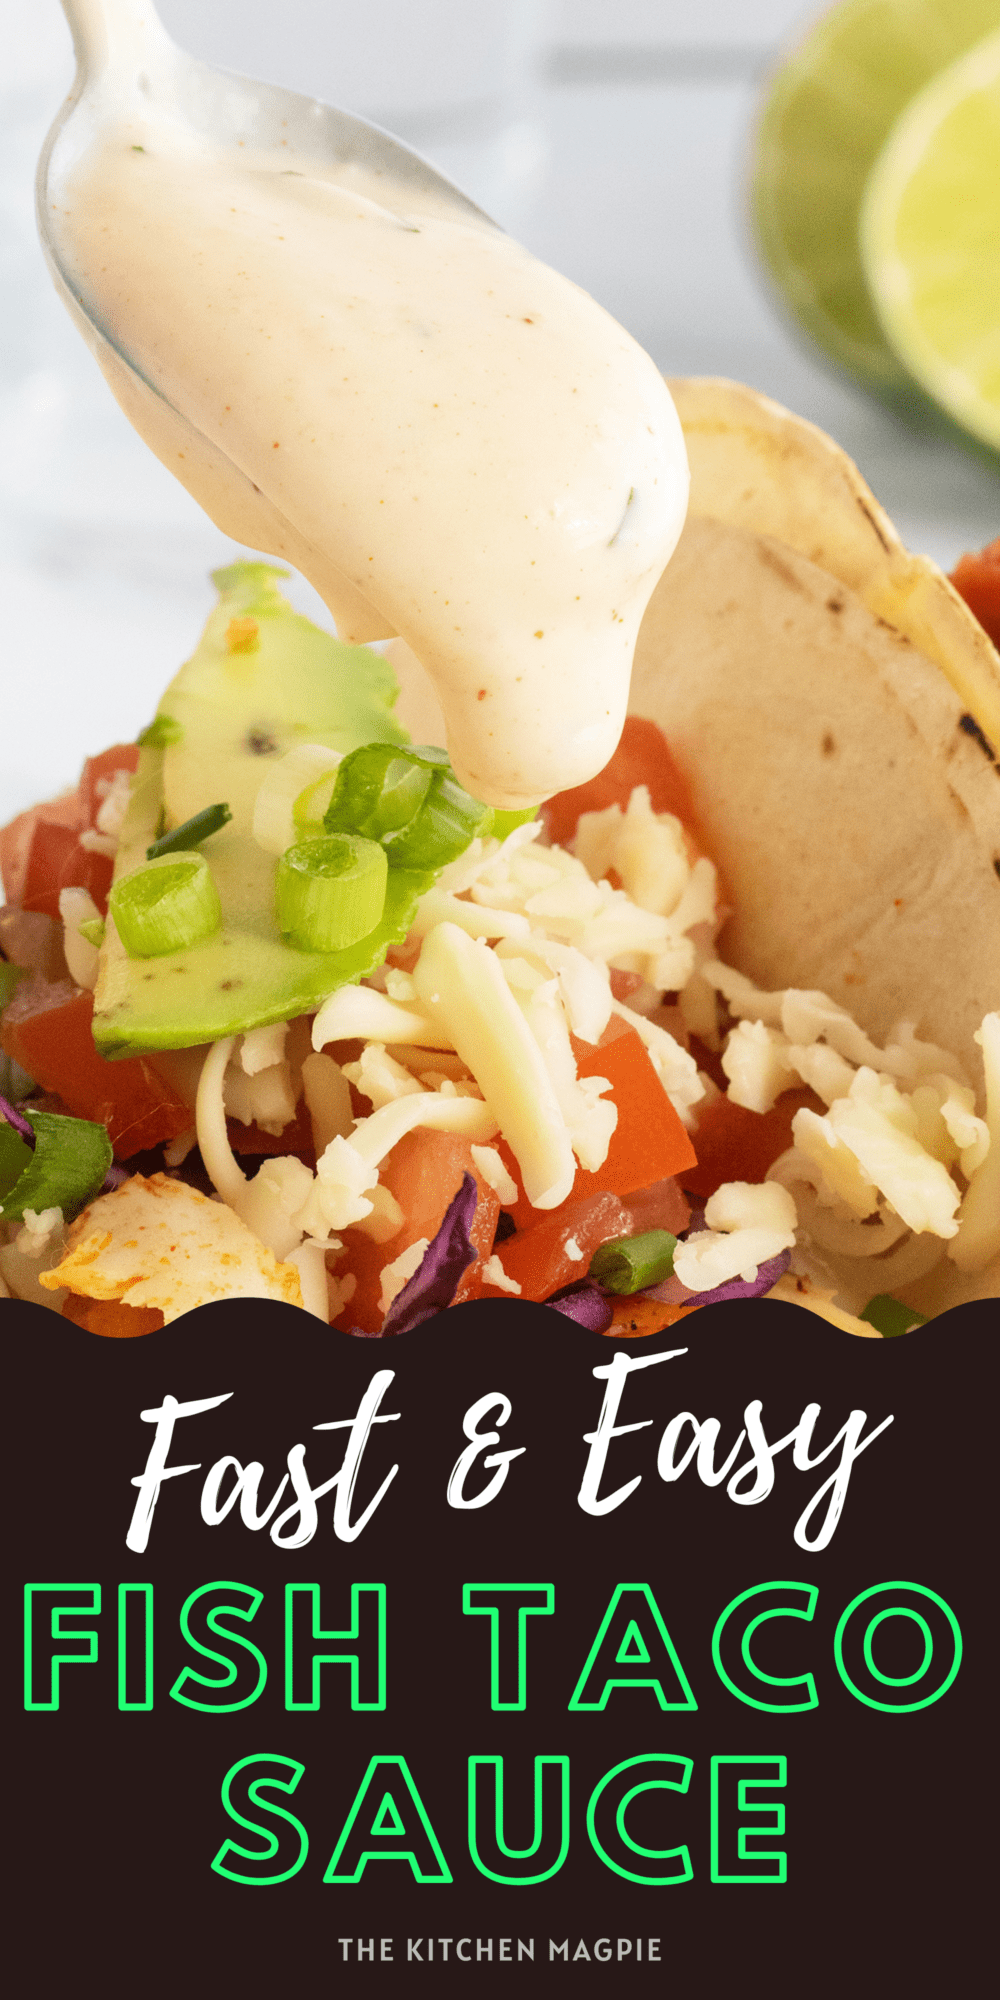 A rich, creamy, acidic, and spicy sauce is just what you need to serve with some fish tacos. Make this sauce to dress your Fish Tacos or use as a dip!